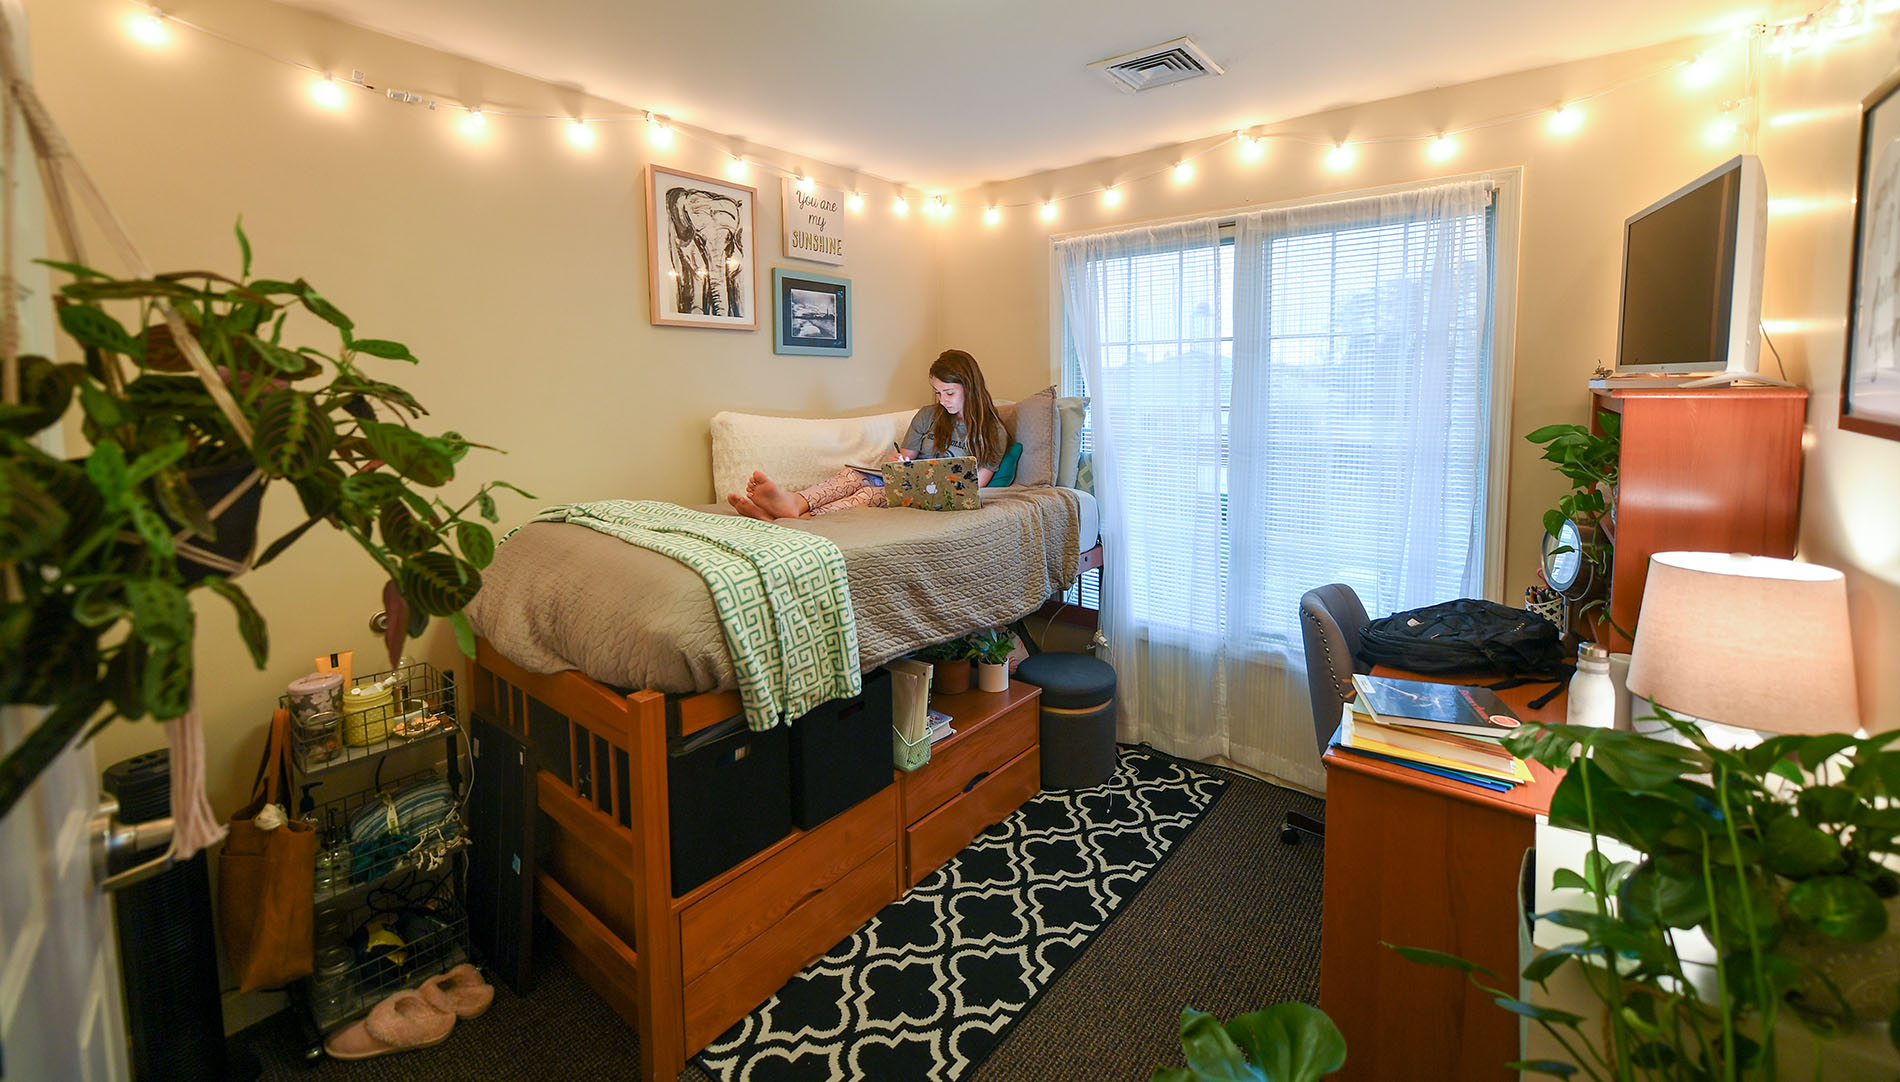             Top 7 Tips for Decorating Your Dorm Room     